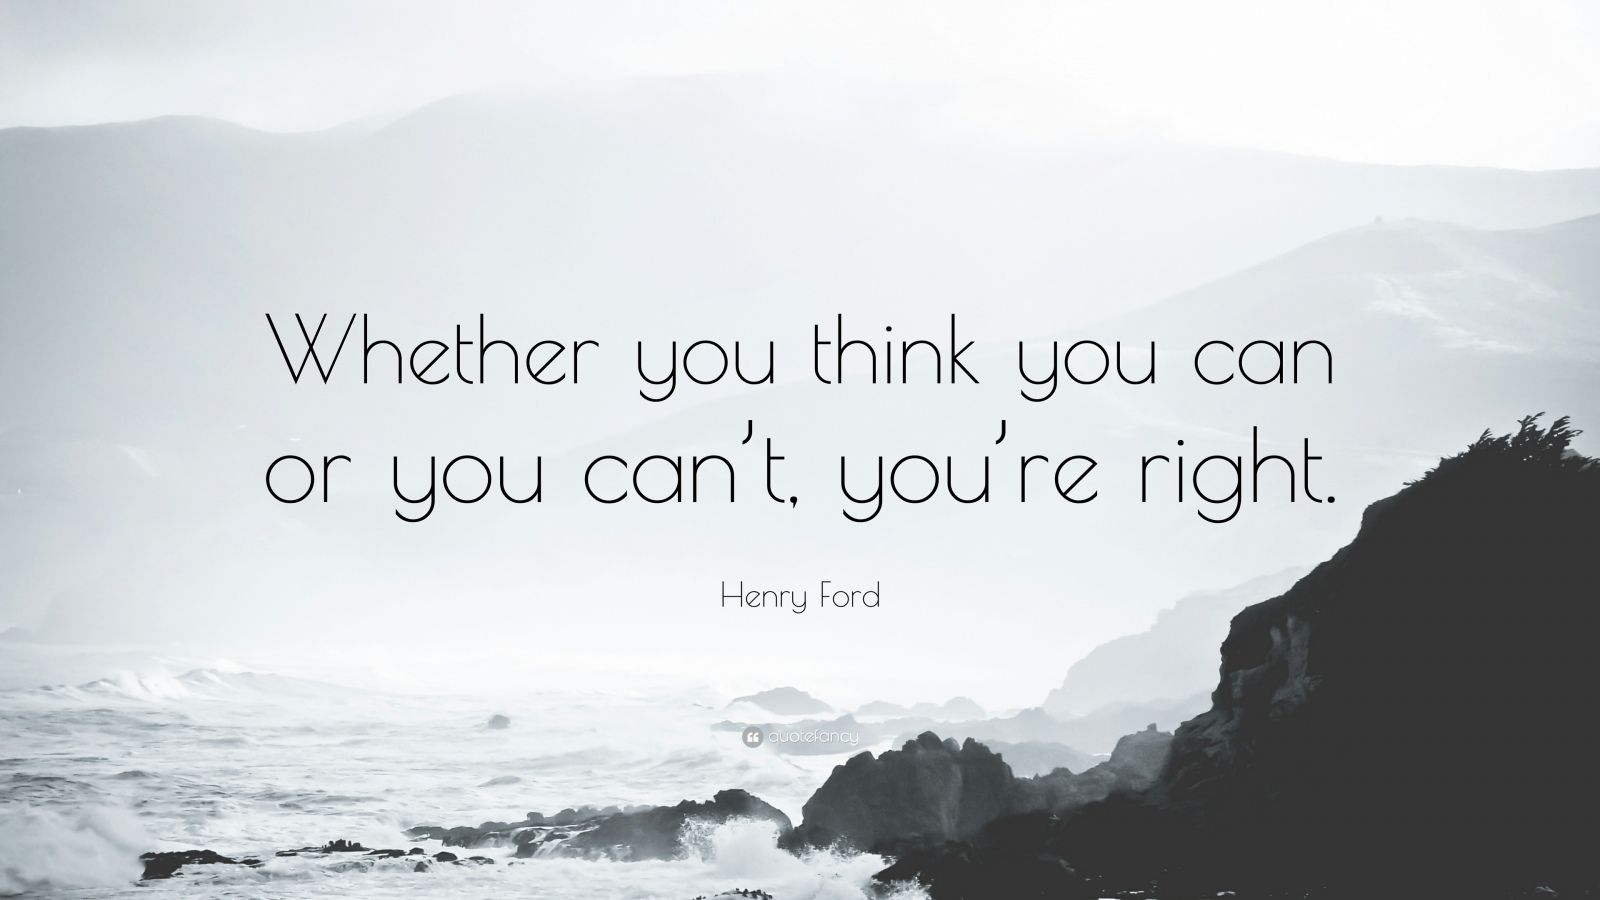 Henry Ford Quote: “Whether you think you can or you can’t, you’re right